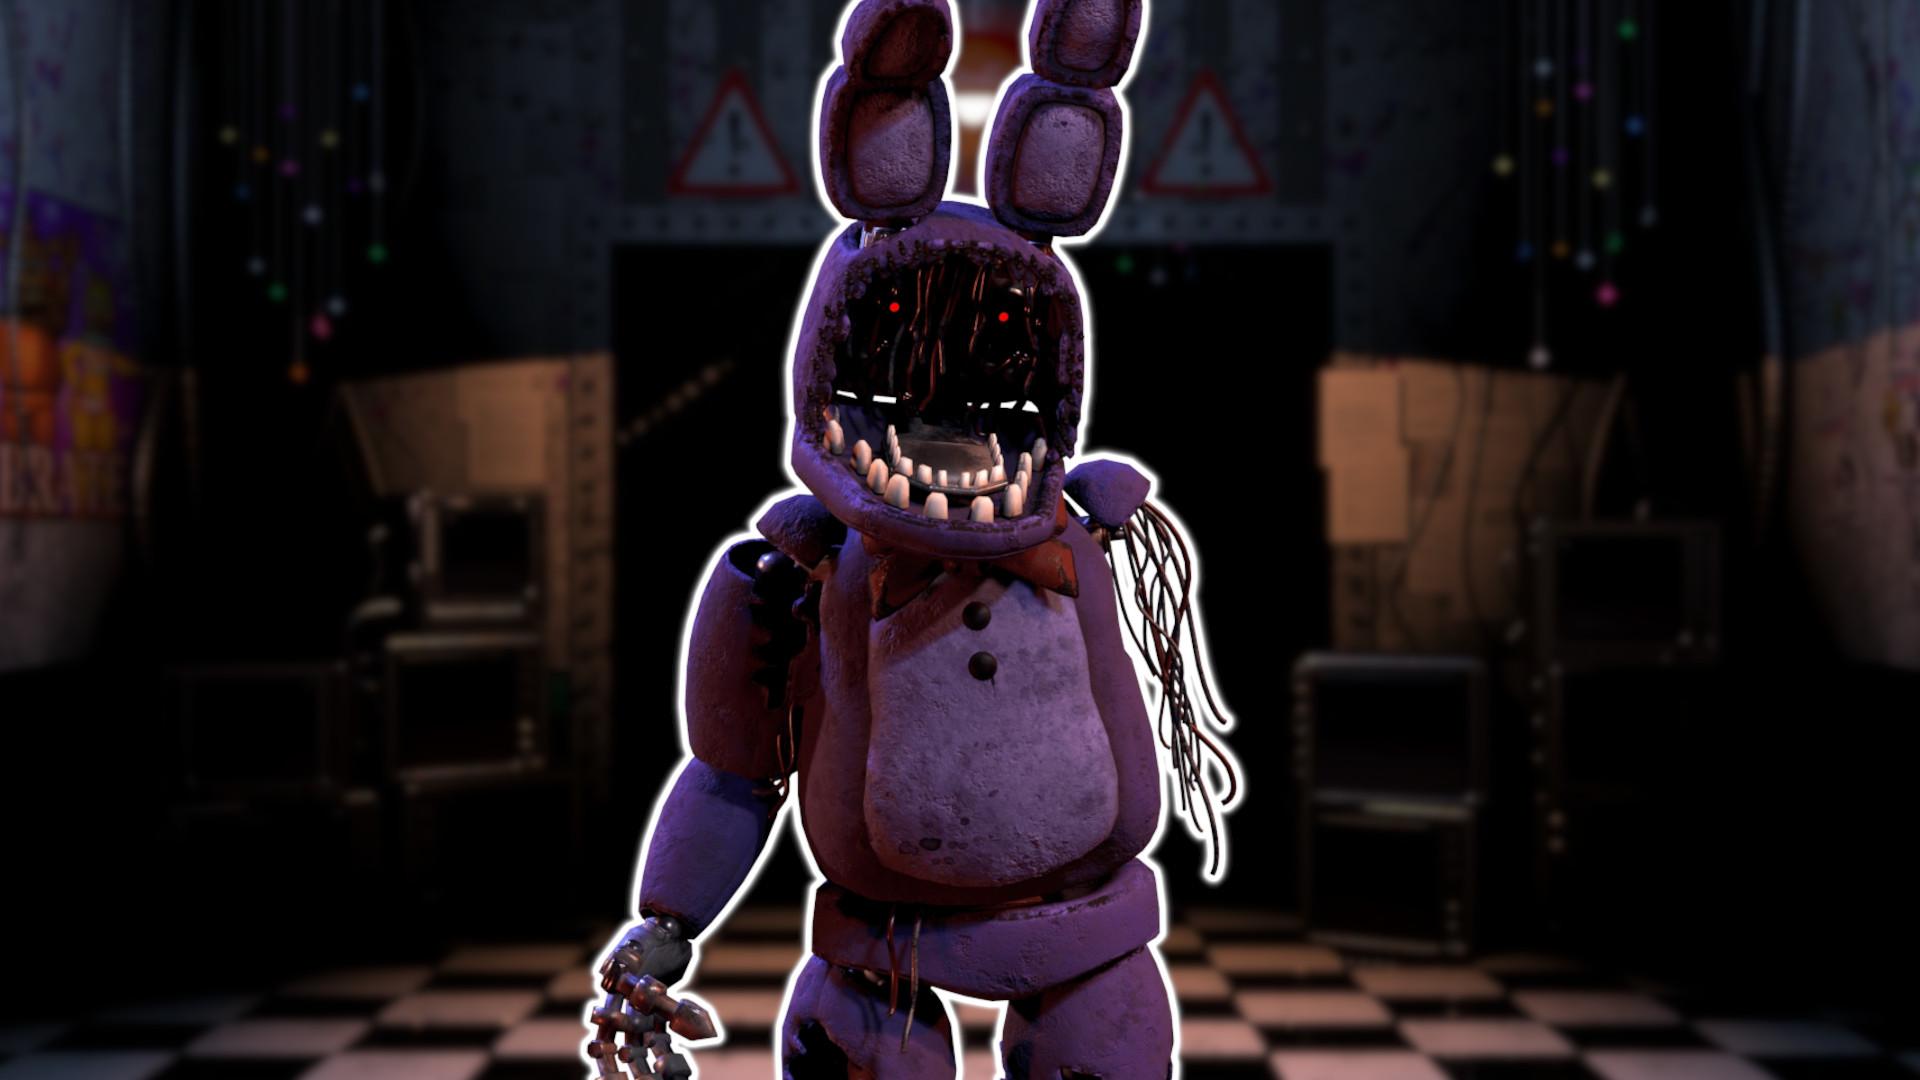 FNAF Bonnie: A cartoon rendition of Glamrock Bonnie outlined in white and pasted on a blurred screenshot of the Mega Pizzaplex lobby